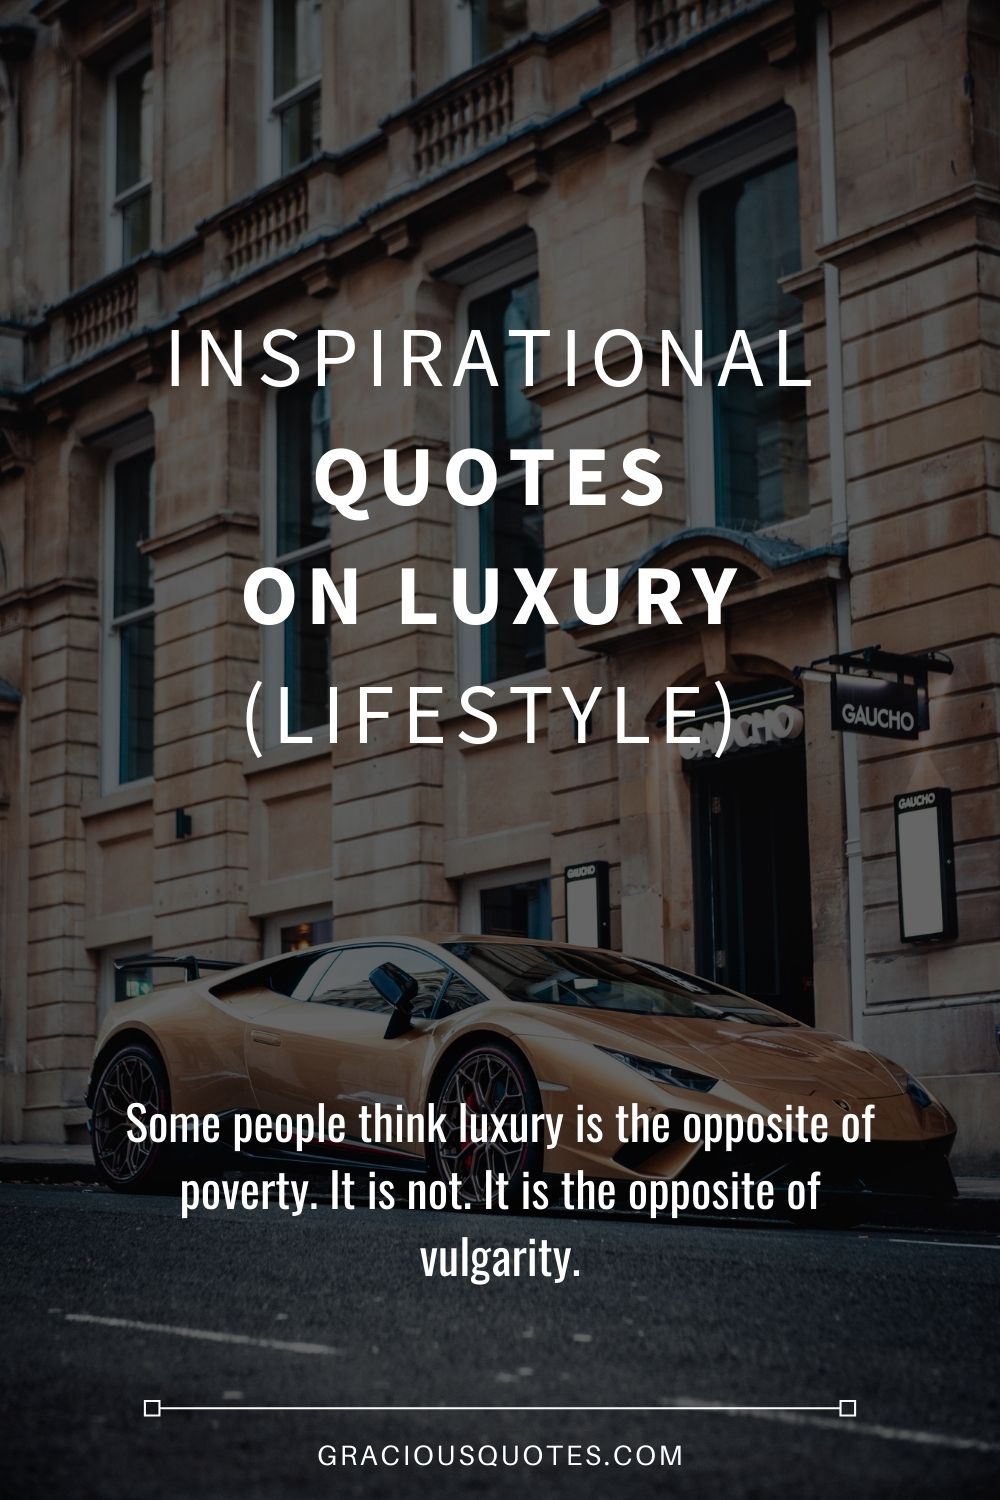 Inspirational Quotes on Luxury (LIFESTYLE) - Gracious Quotes